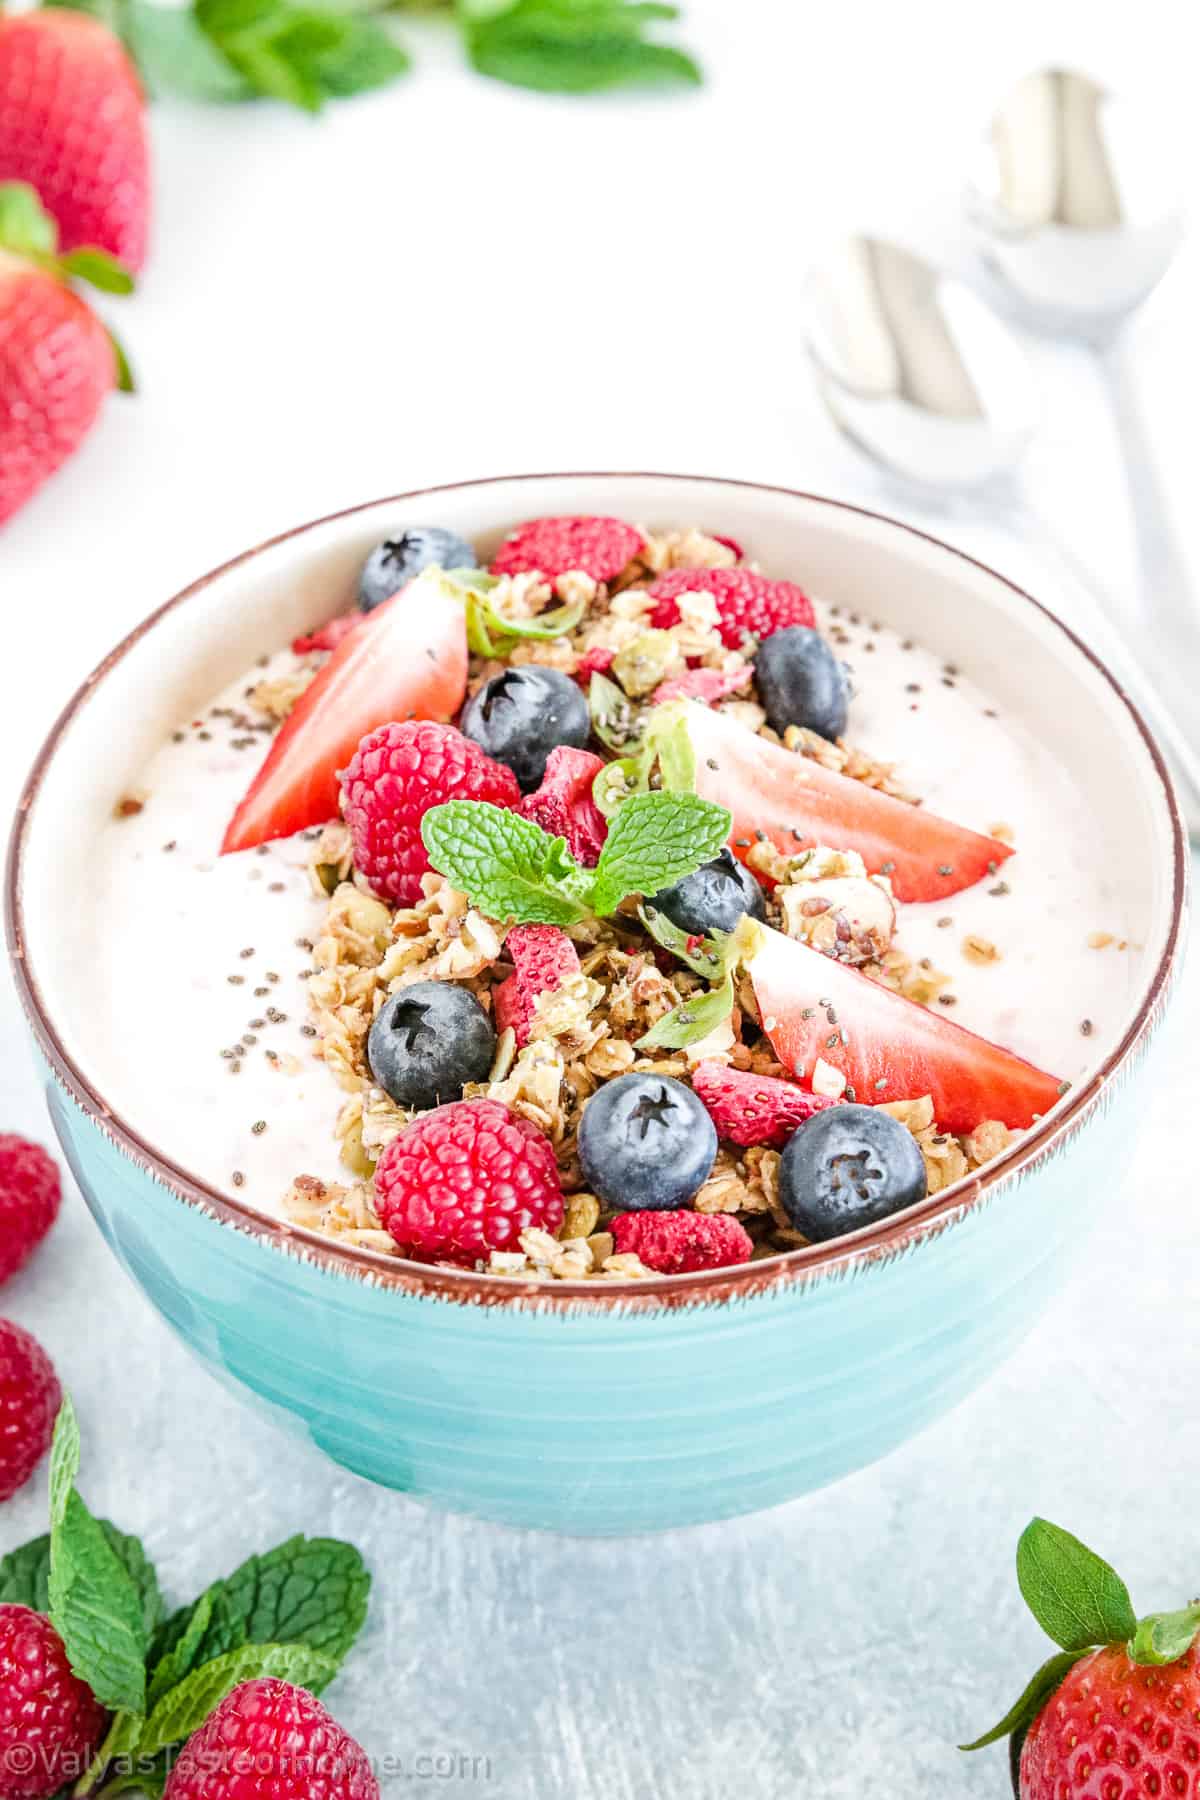 Just about anything can go into your Yogurt with Granola! The sky is the limit here so be creative and have fun.